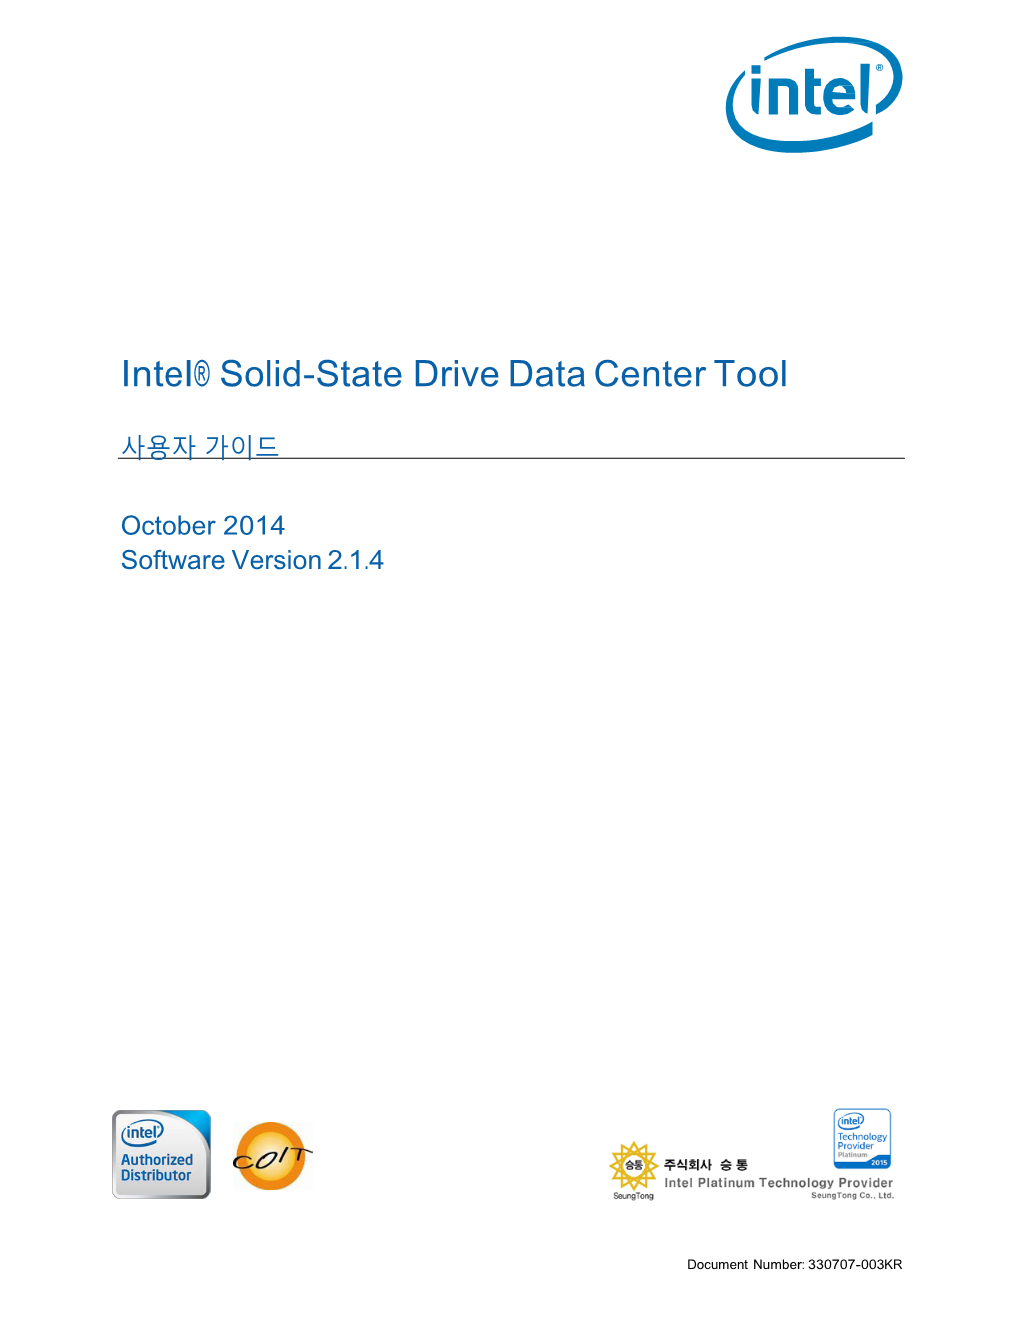 Intel® Solid-State Drive Data Center Tool